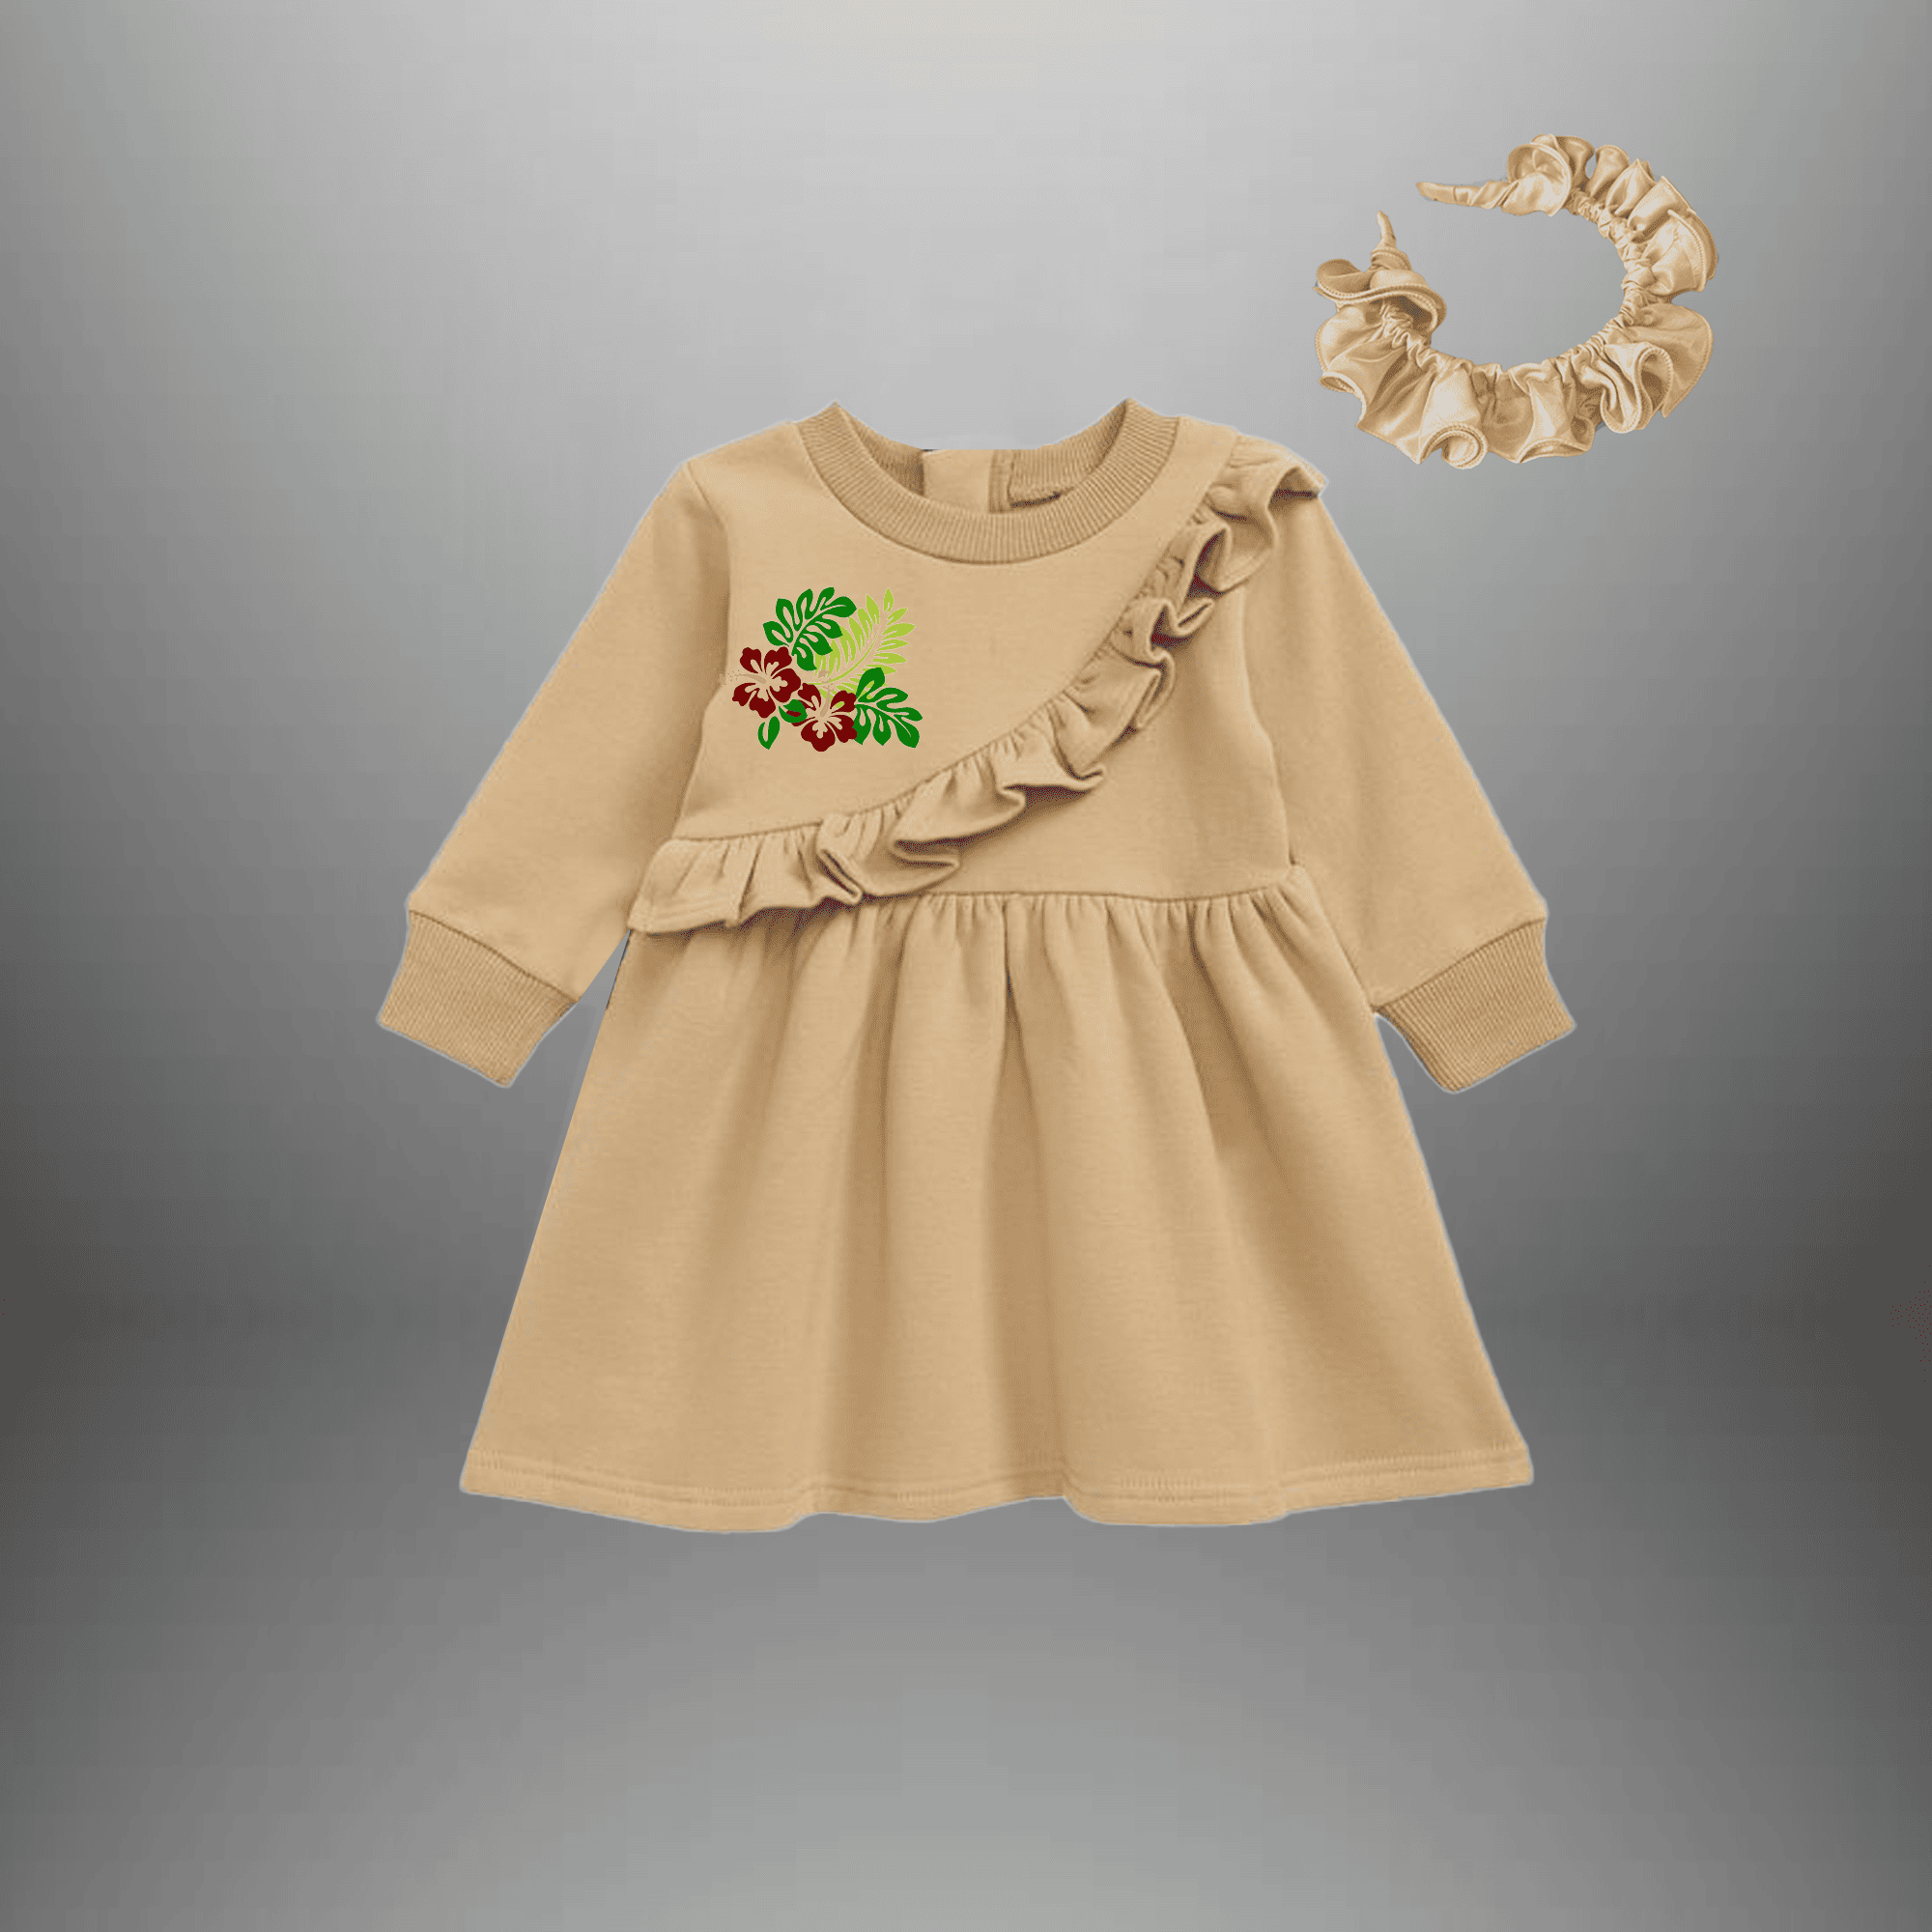 Girl's full sleeve beige color dress with frills and floral motif-RKFCW474